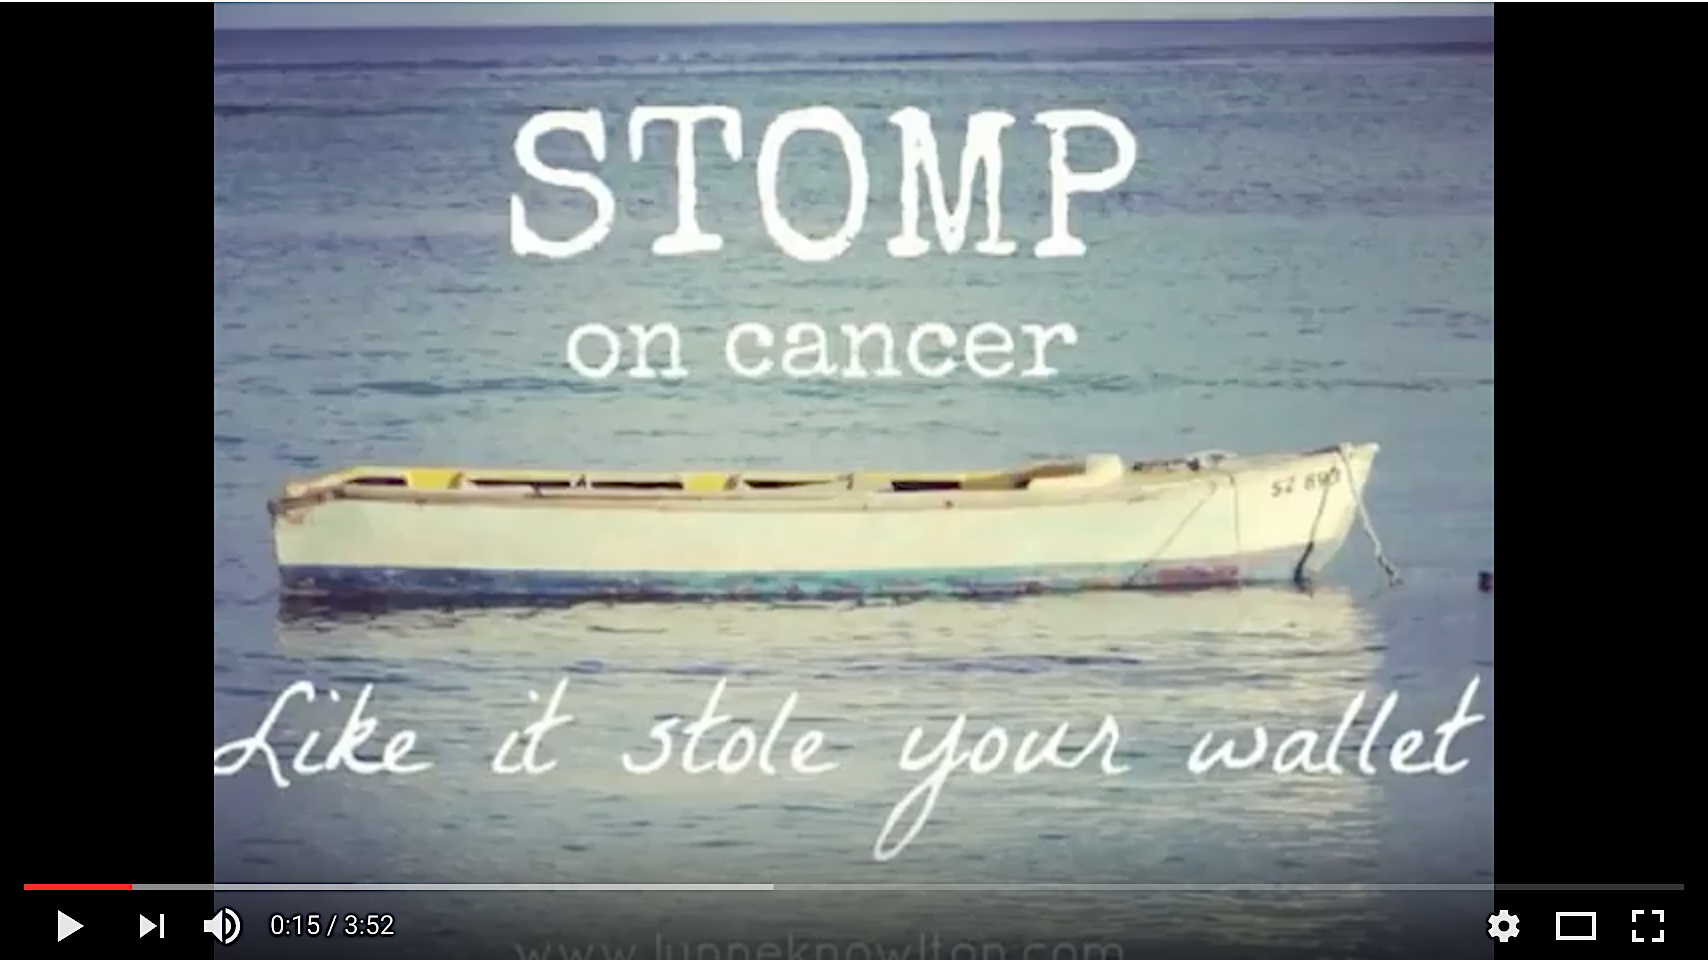 VIDEO : Stomp on cancer like it stole your wallet https://youtu.be/lRyiqF_b0EQ